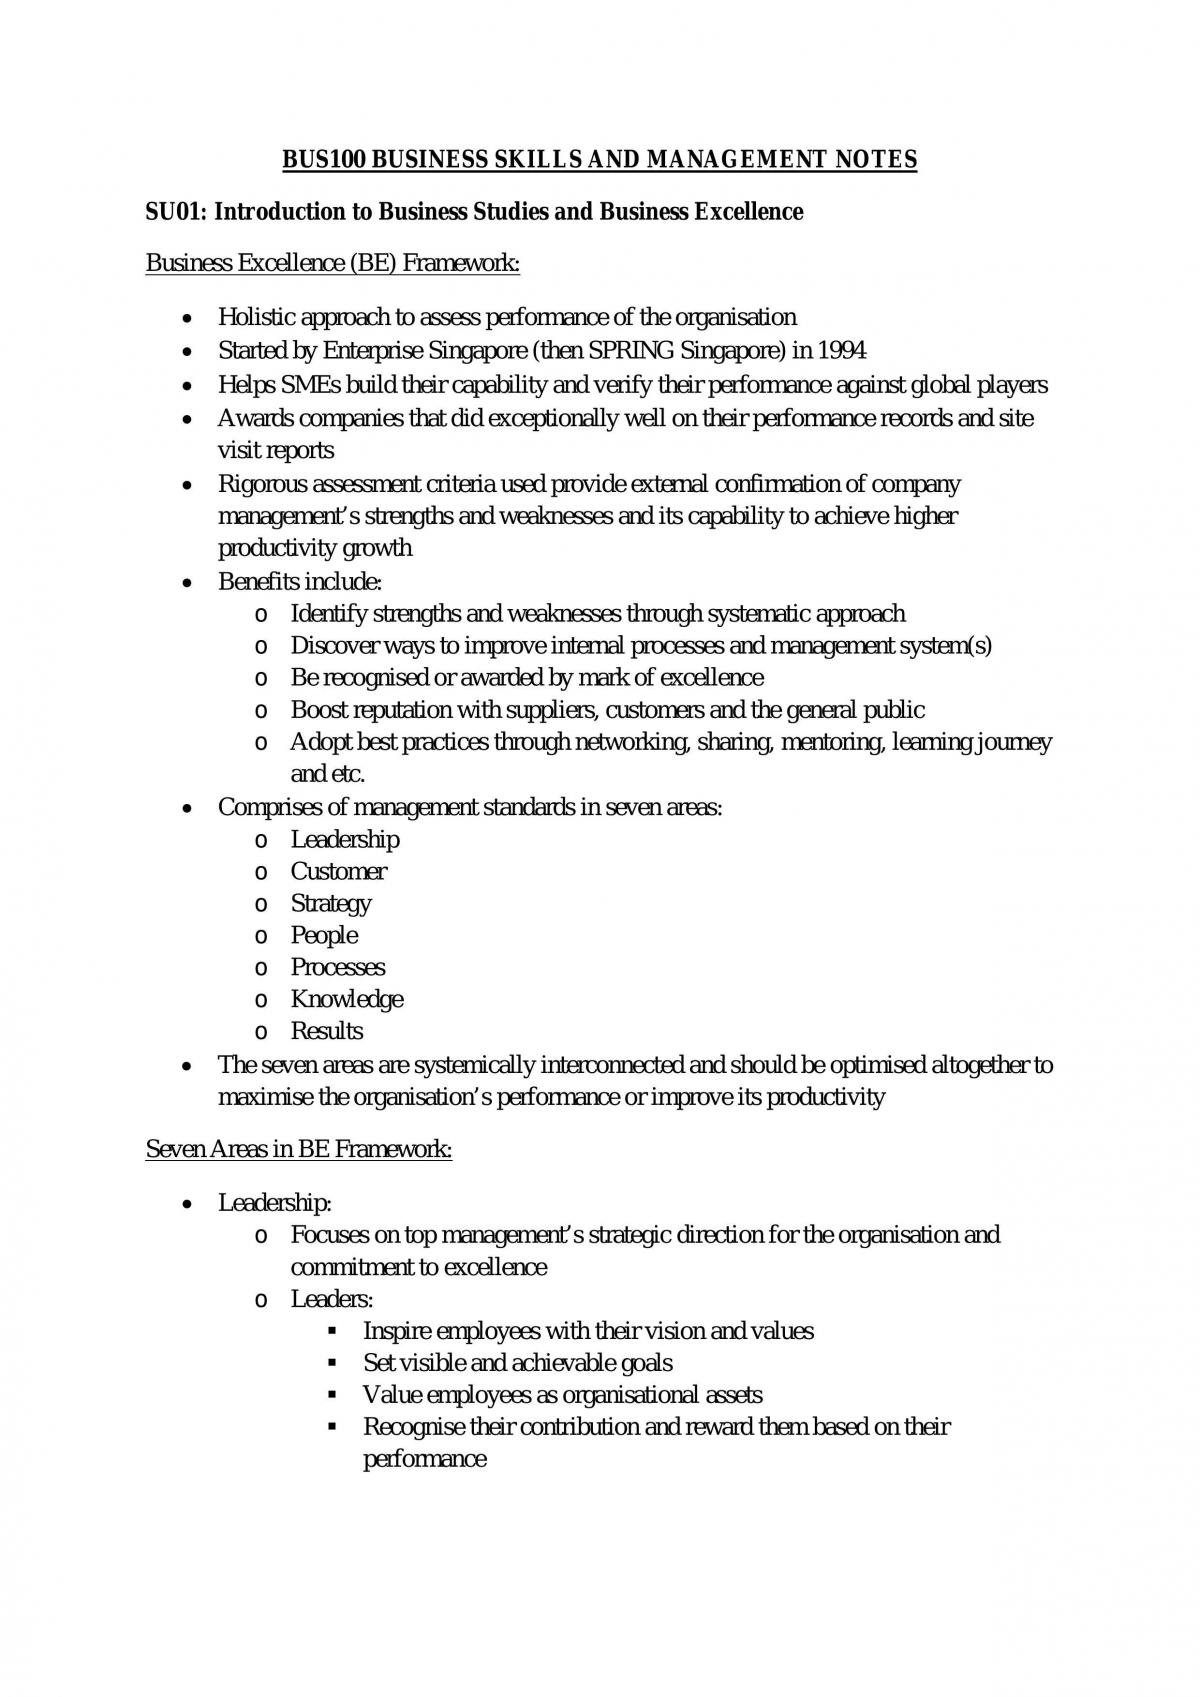 BUS100 Business Skills and Management Notes - Page 1